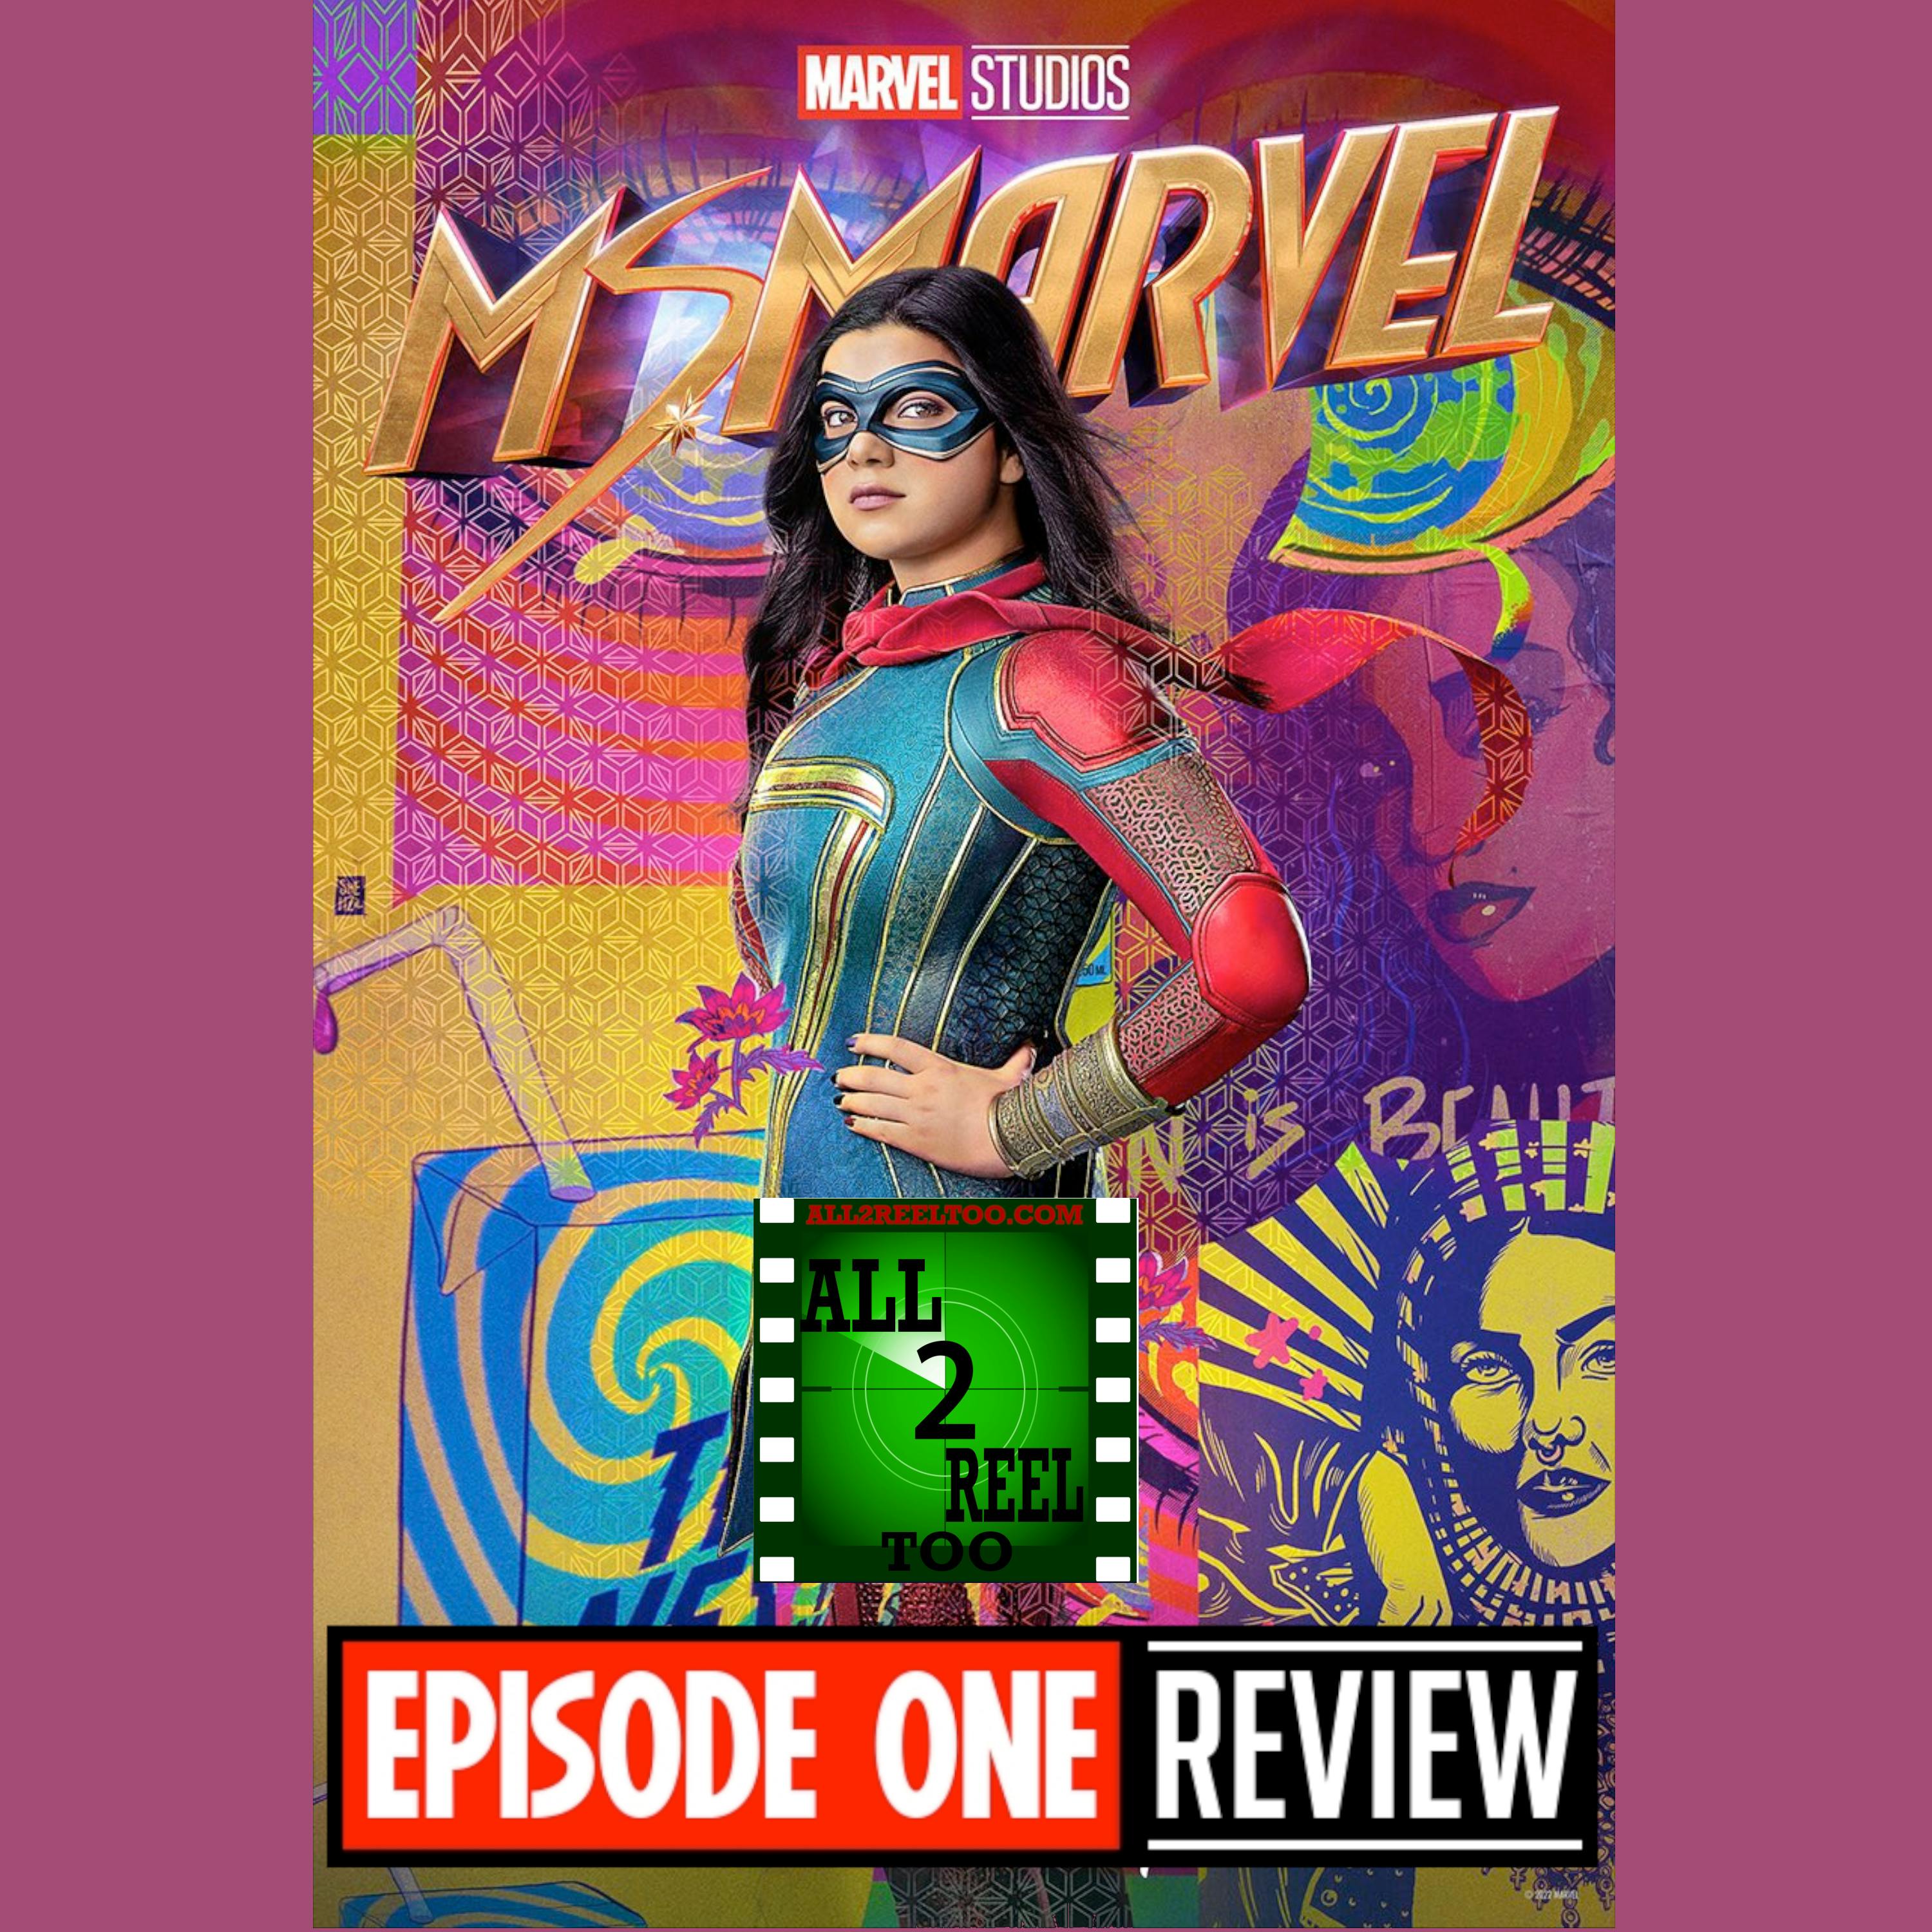 Ms. Marvel EPISODE 1 REVIEW Image